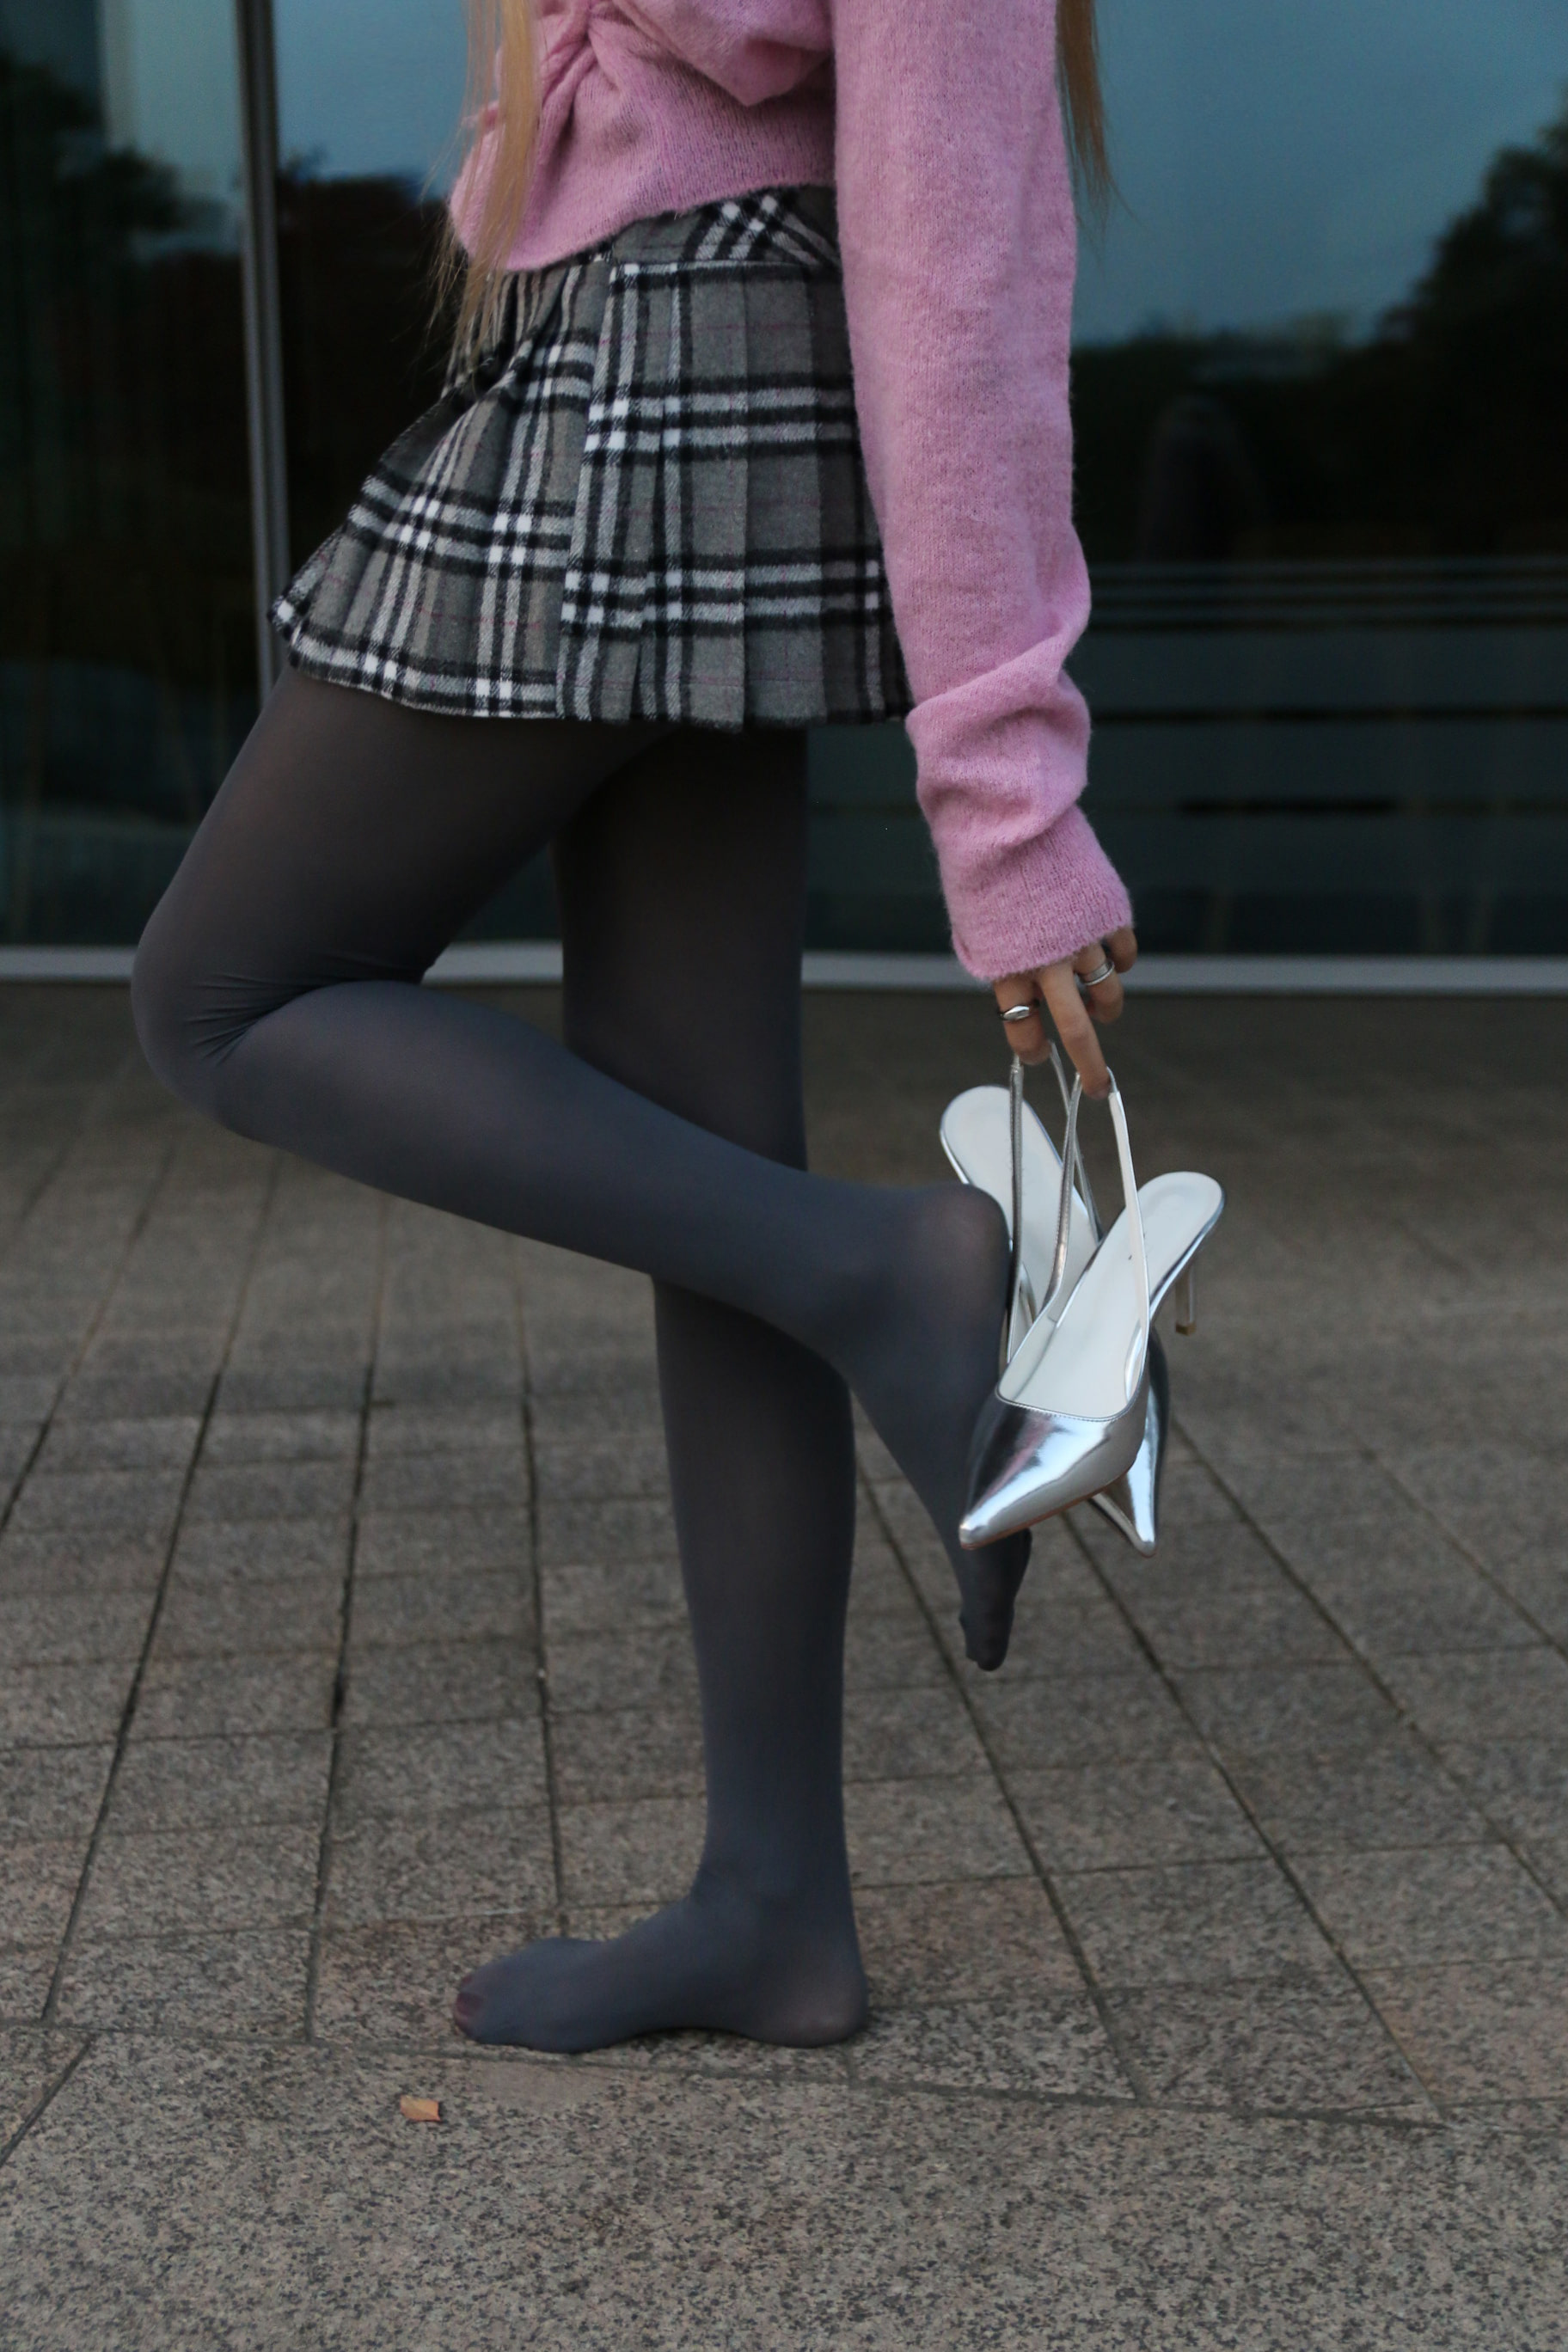 80d charcoal stocking 당일발송